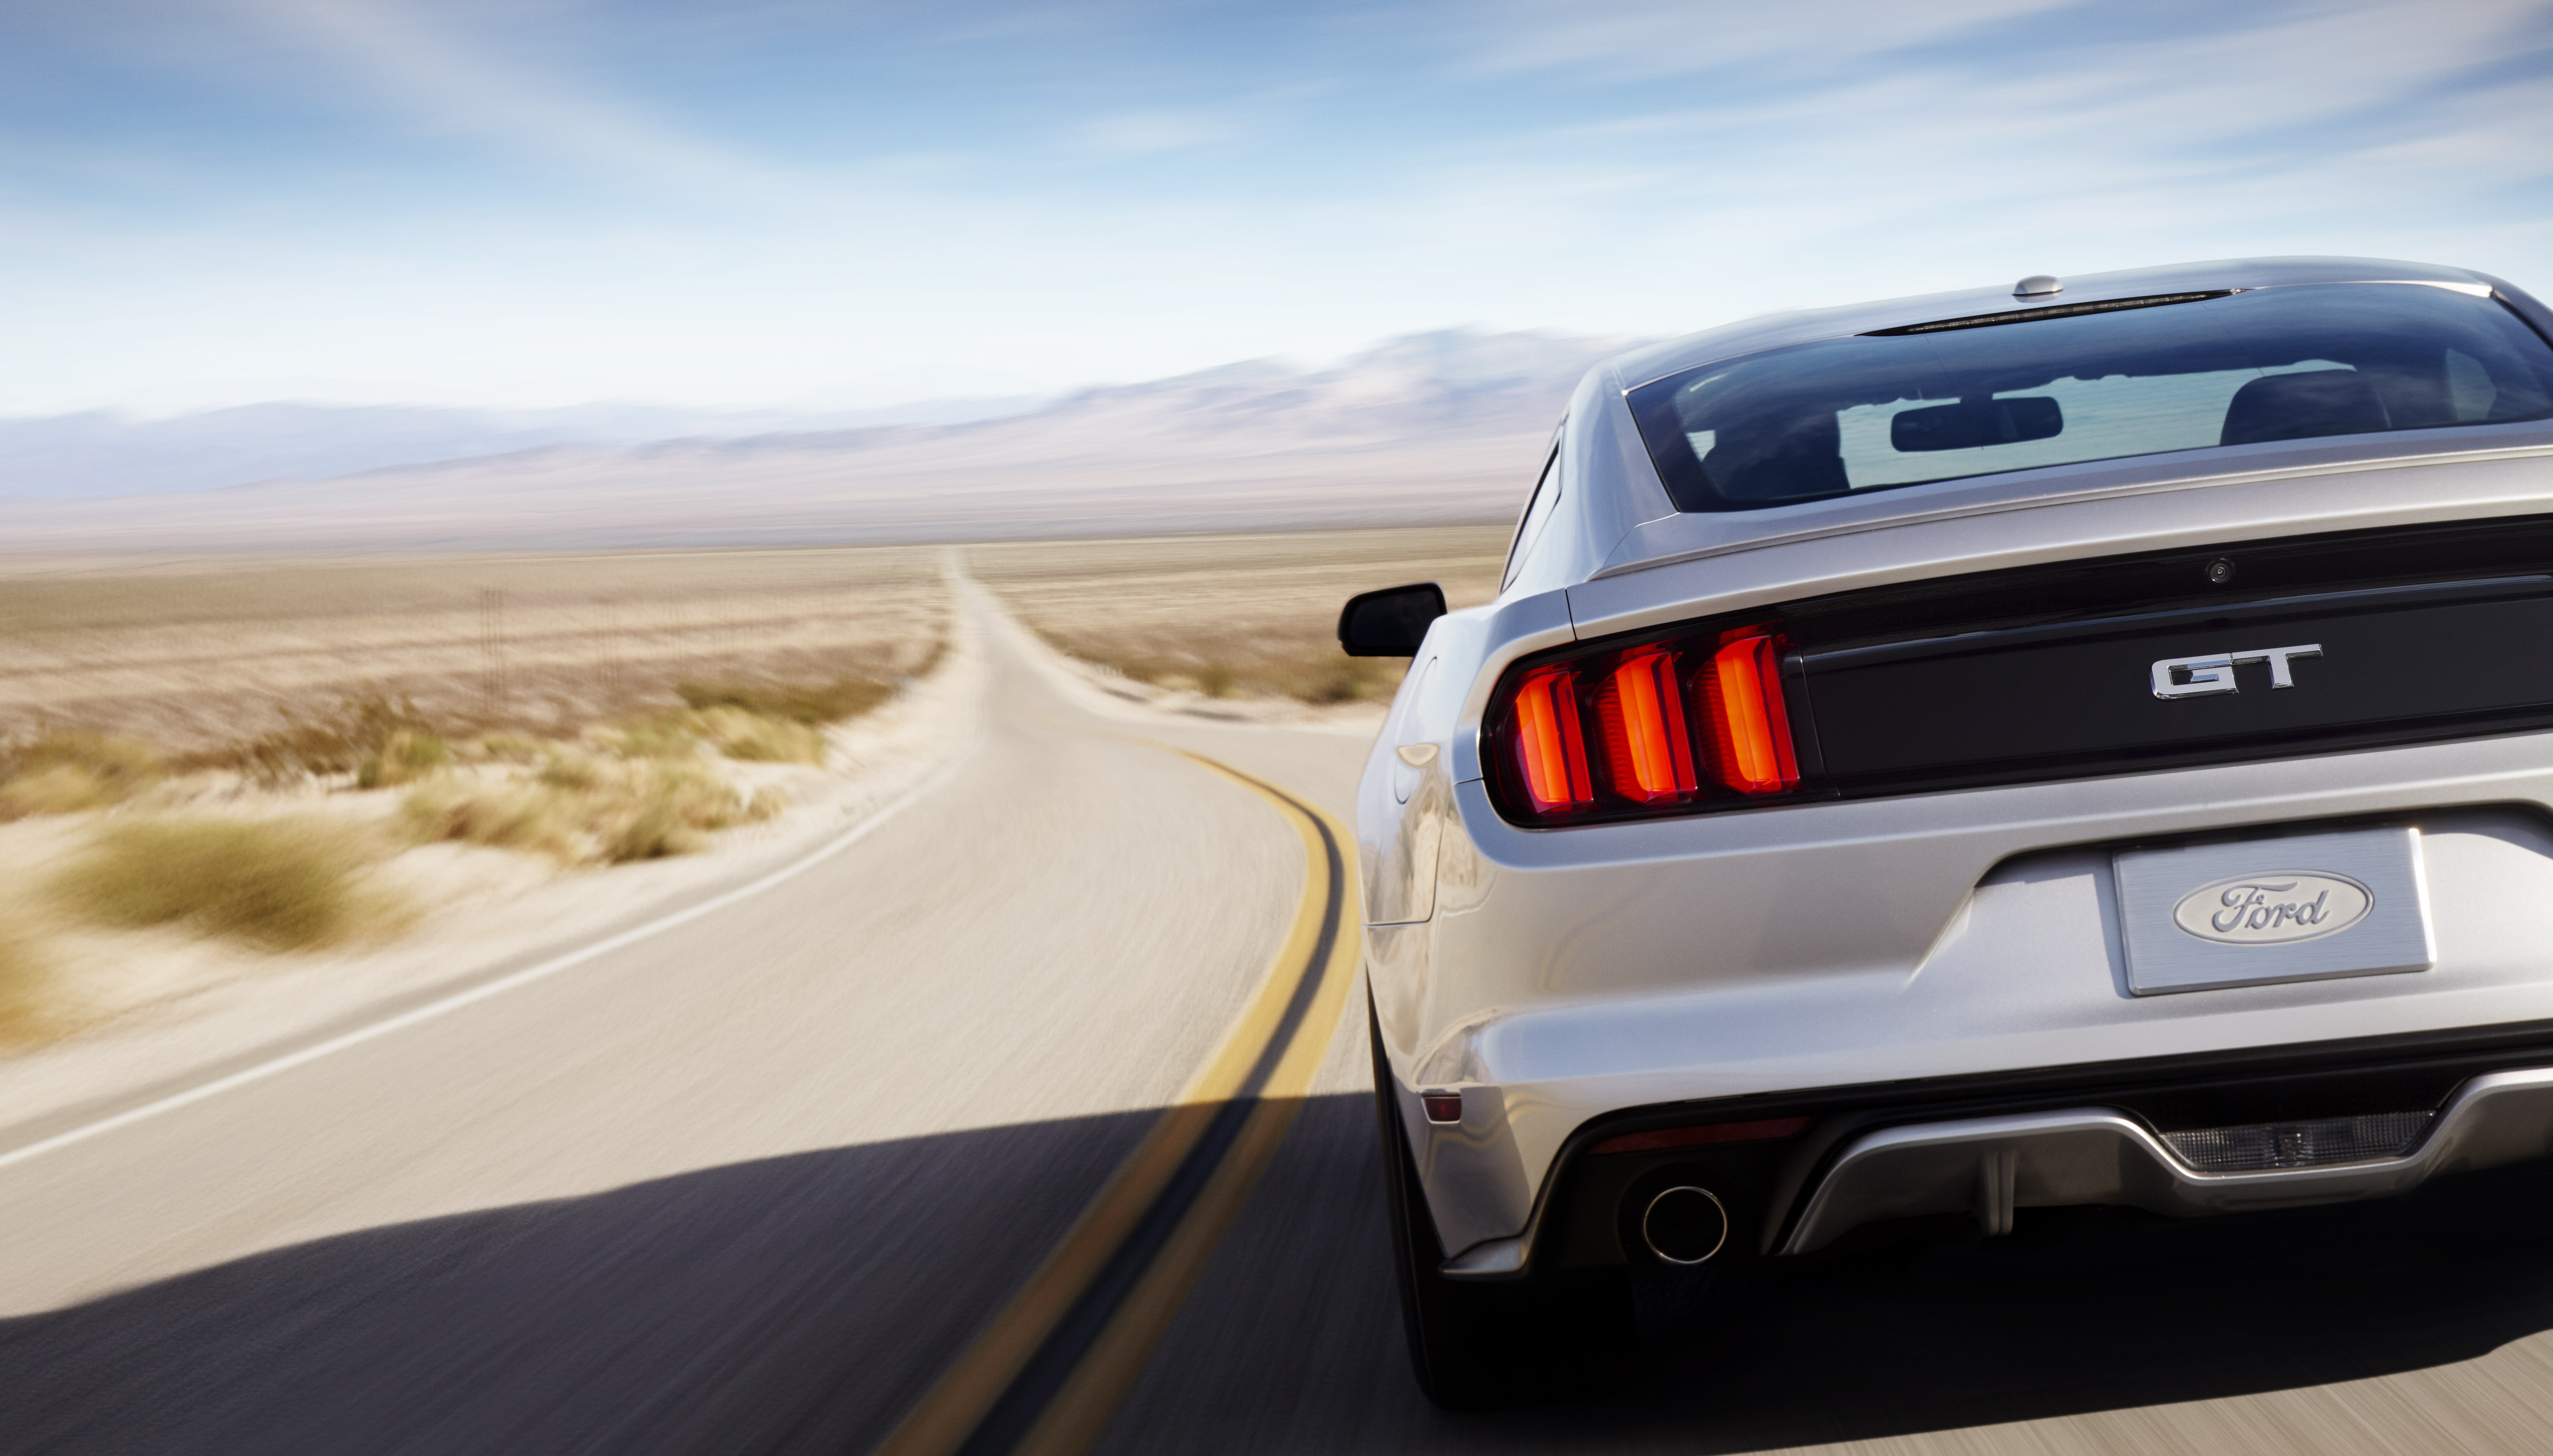 Nice wallpapers Ford Mustang 5760x3285px